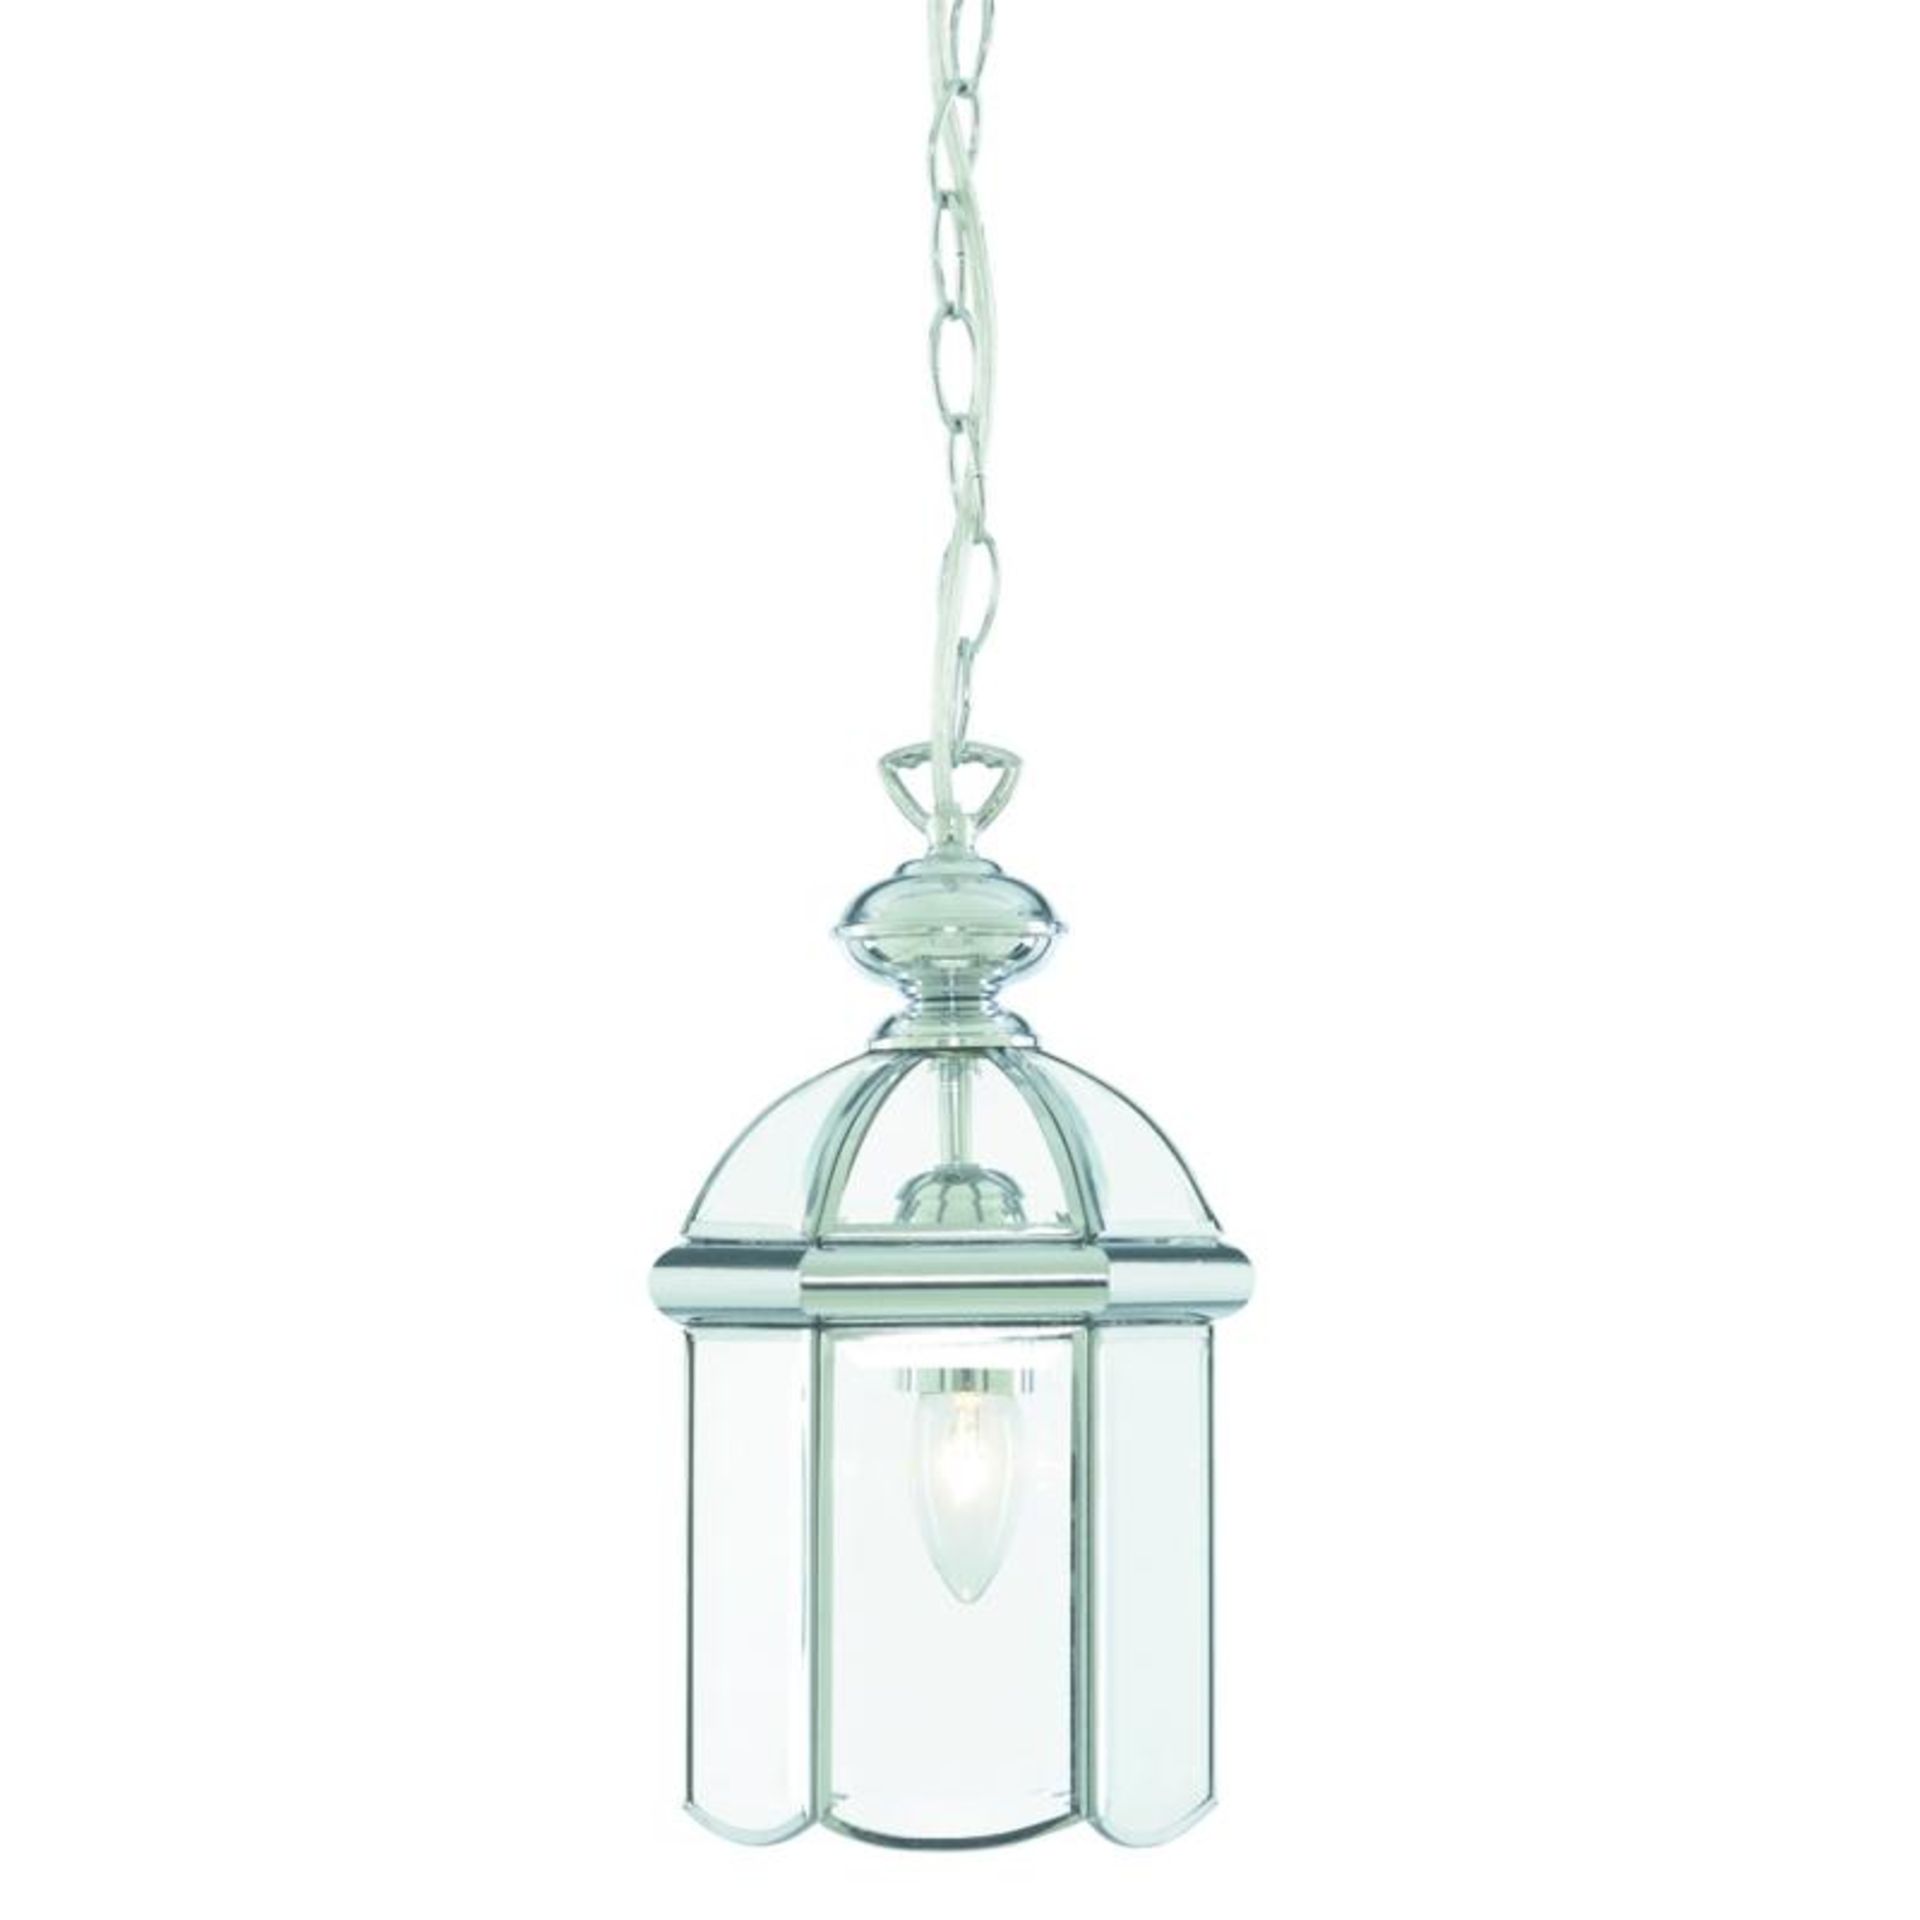 1 x Chrome Lantern With Polished Bevelled Domed Glass Panels - New Boxed Stock - CL323 - Ref: 5131CC